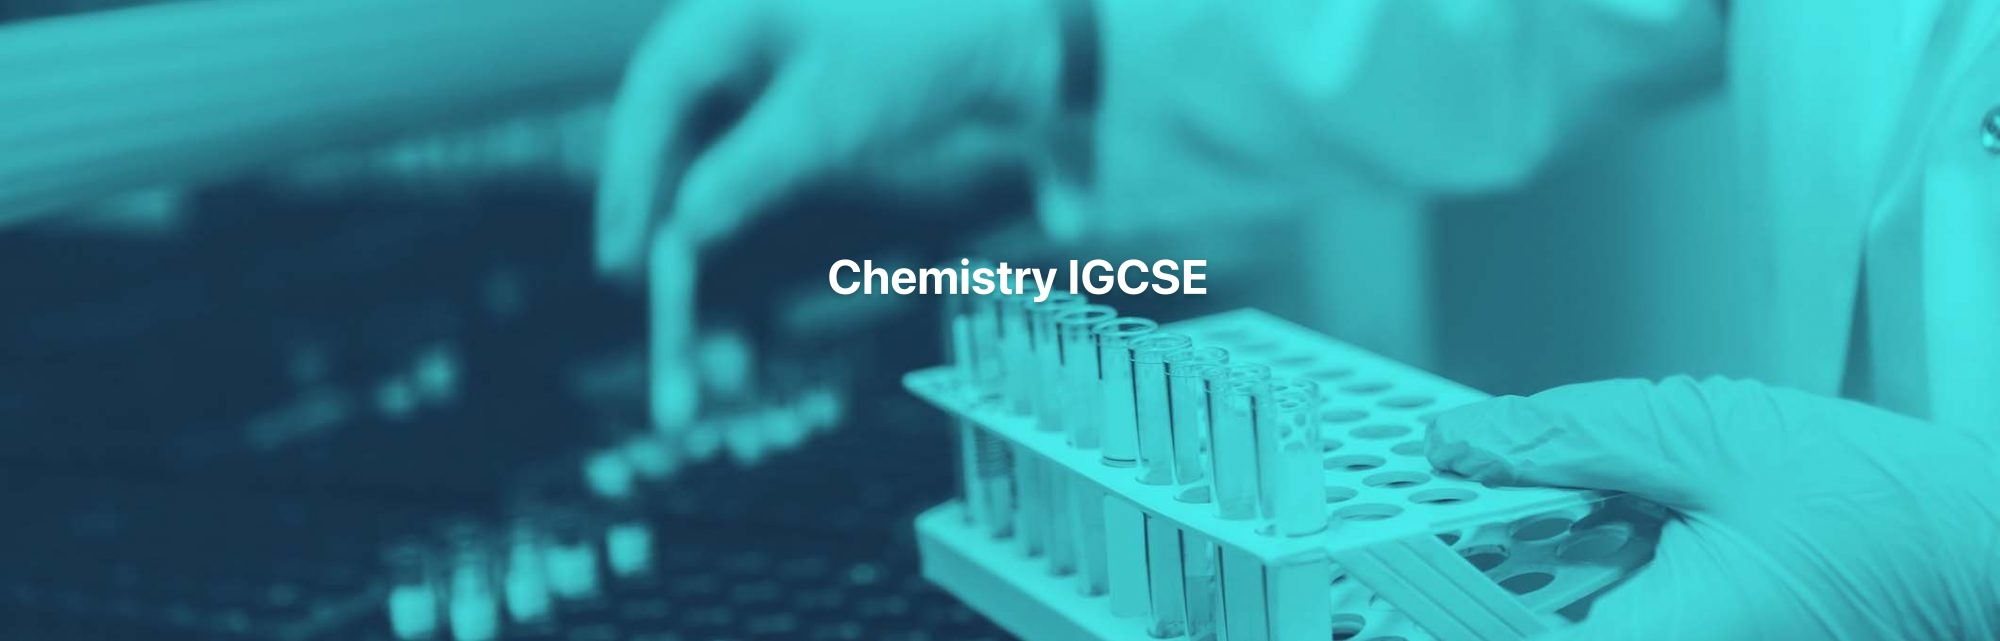 Chemistry IGCSE Distance Learning Course by Oxbridge